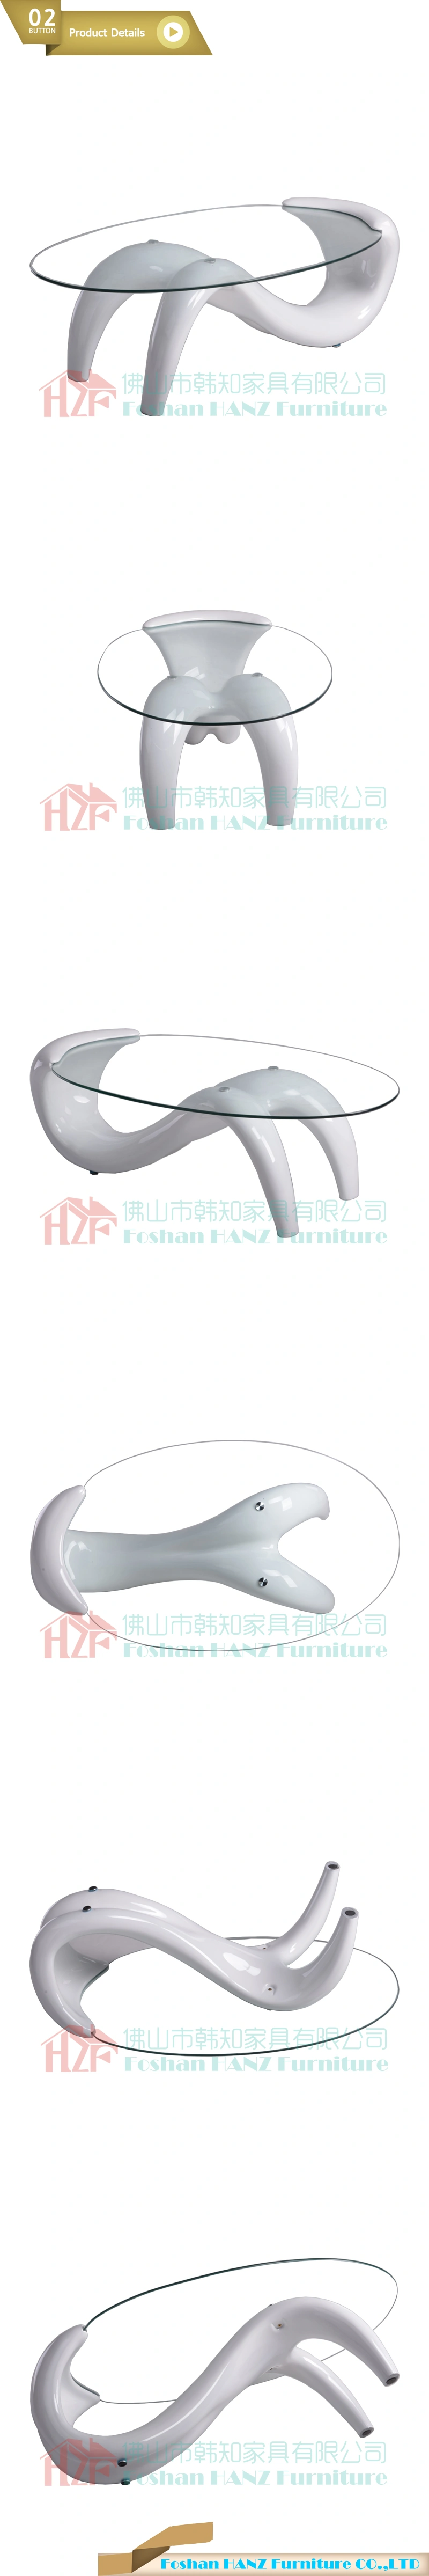 High Quality Cheapest Plastic Fashion Templed Glass Tea Coffee Table (Hz-T29W)